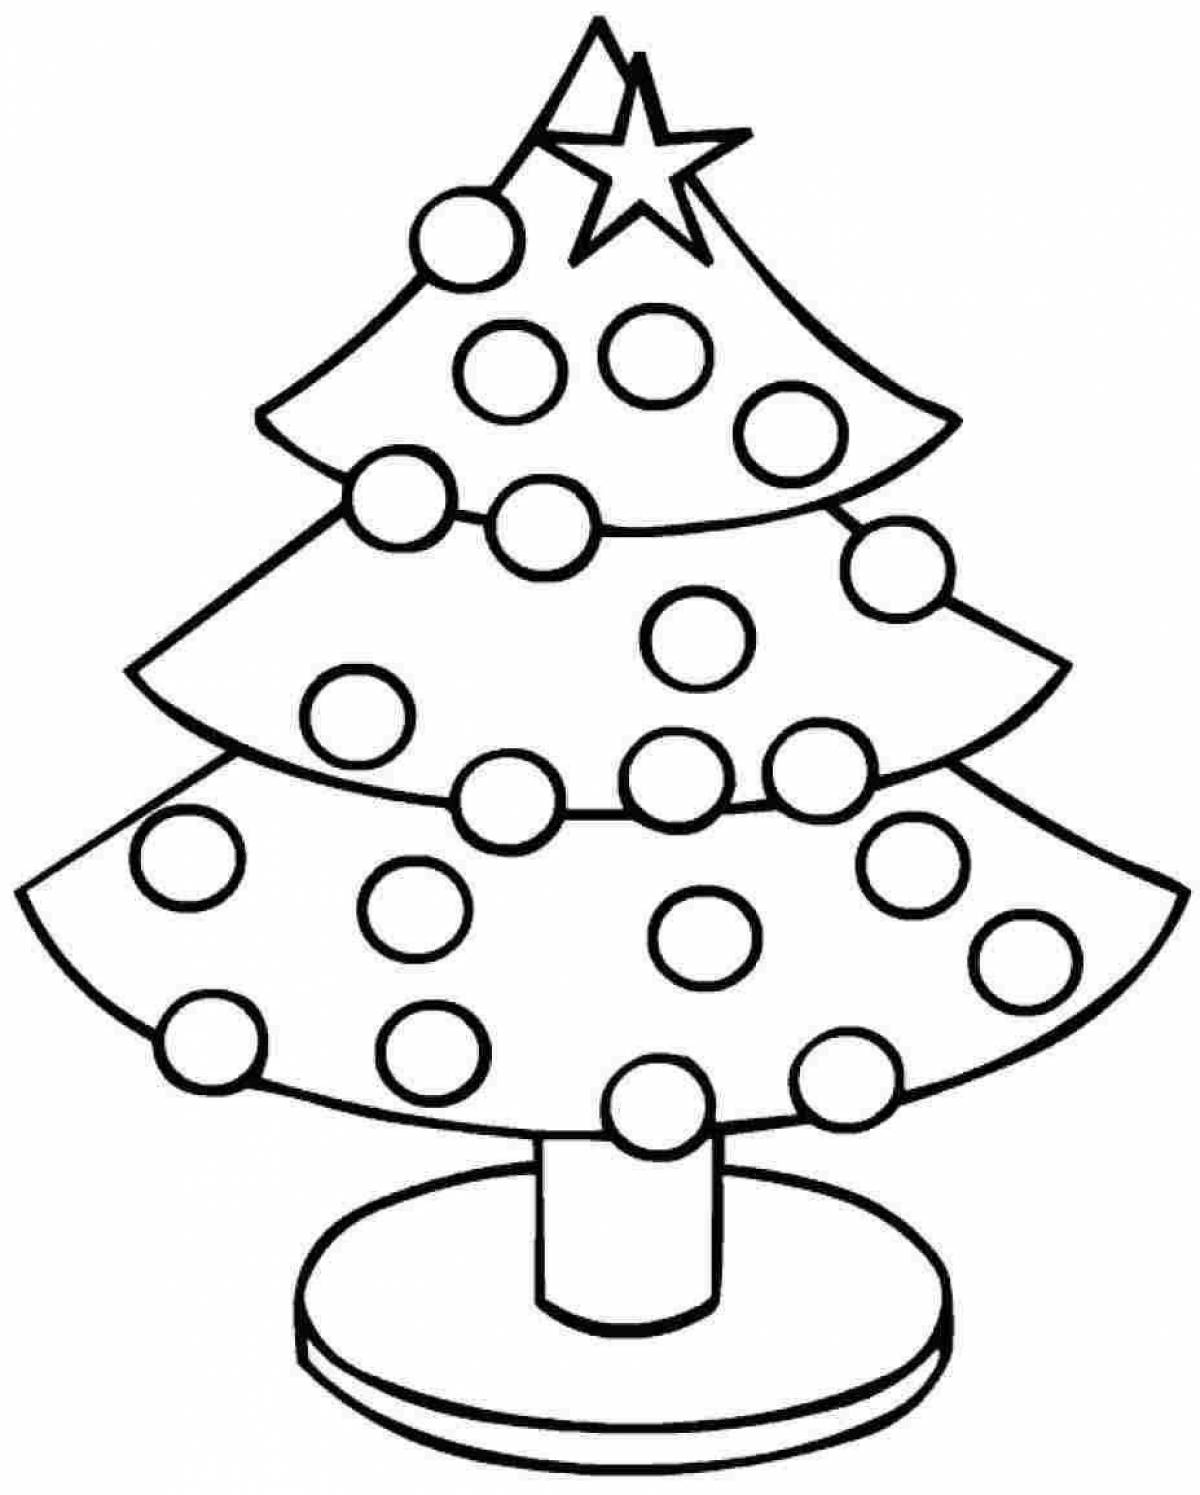 Luminous Christmas tree coloring book for 5-6 year olds